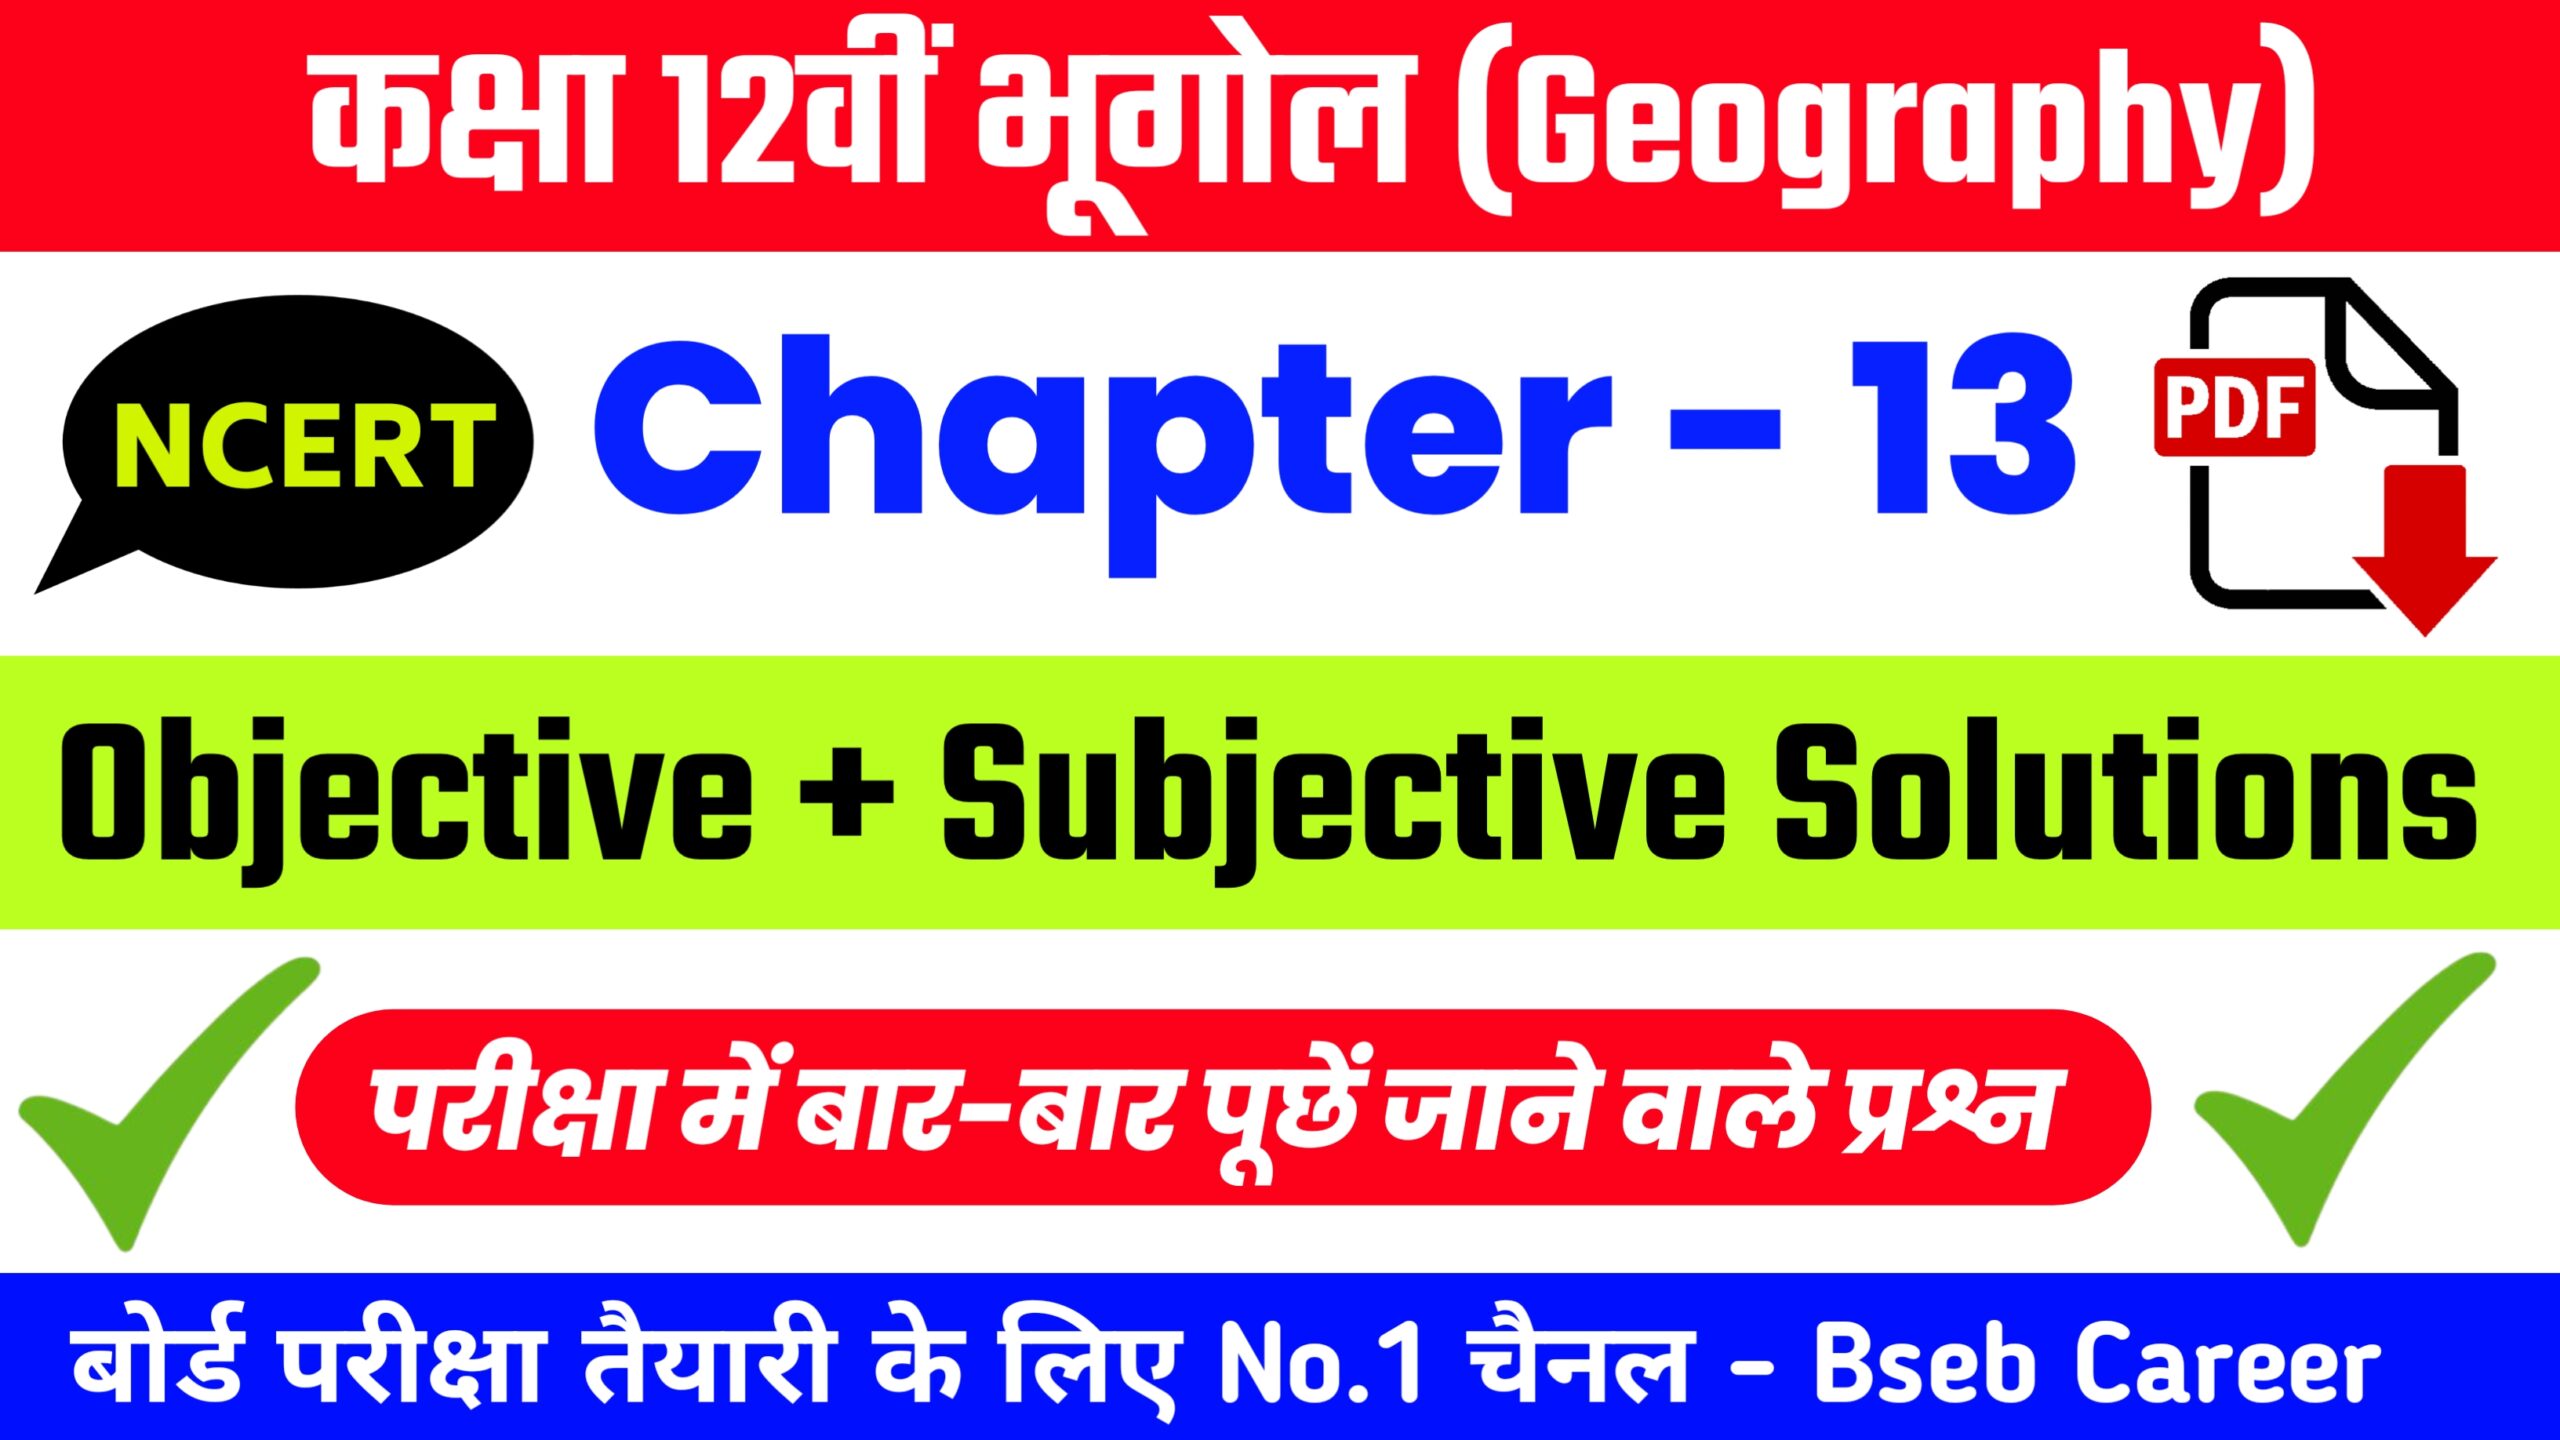 Class 12th Geography Chapter 13